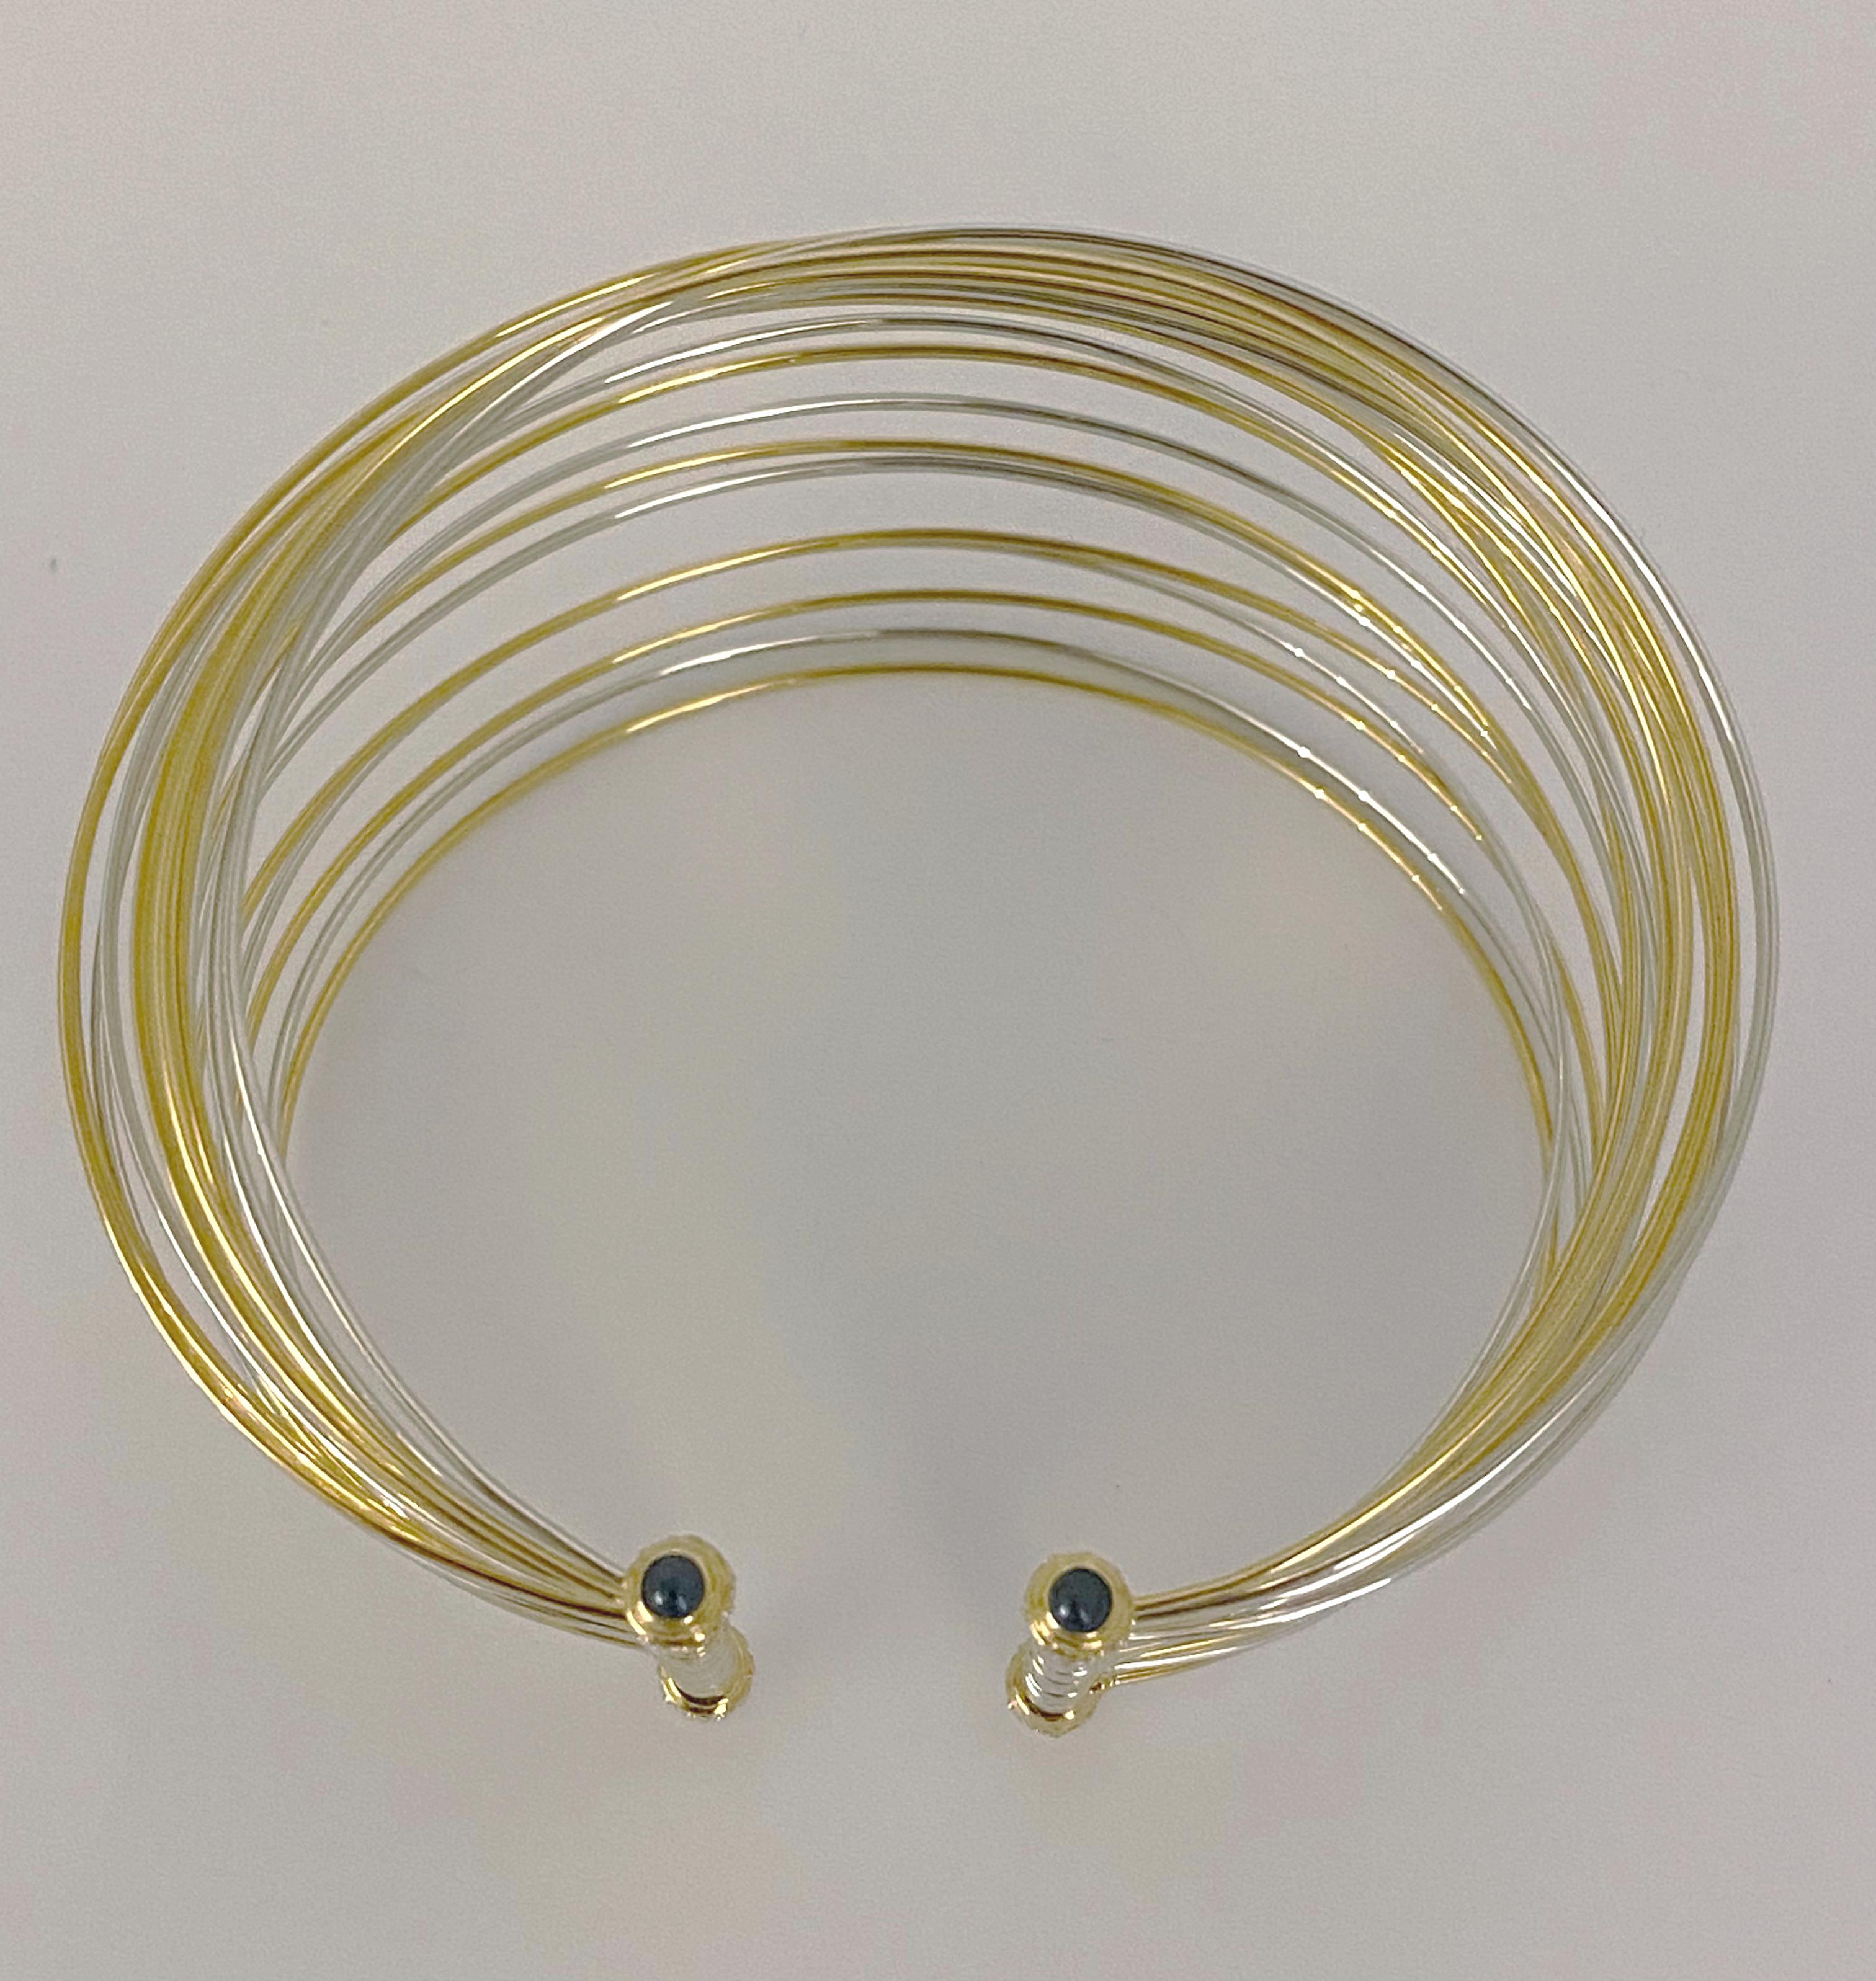 SCAVIA Bracelet 21 Threads White Yellow Elastic Gold In New Condition For Sale In Rome, IT